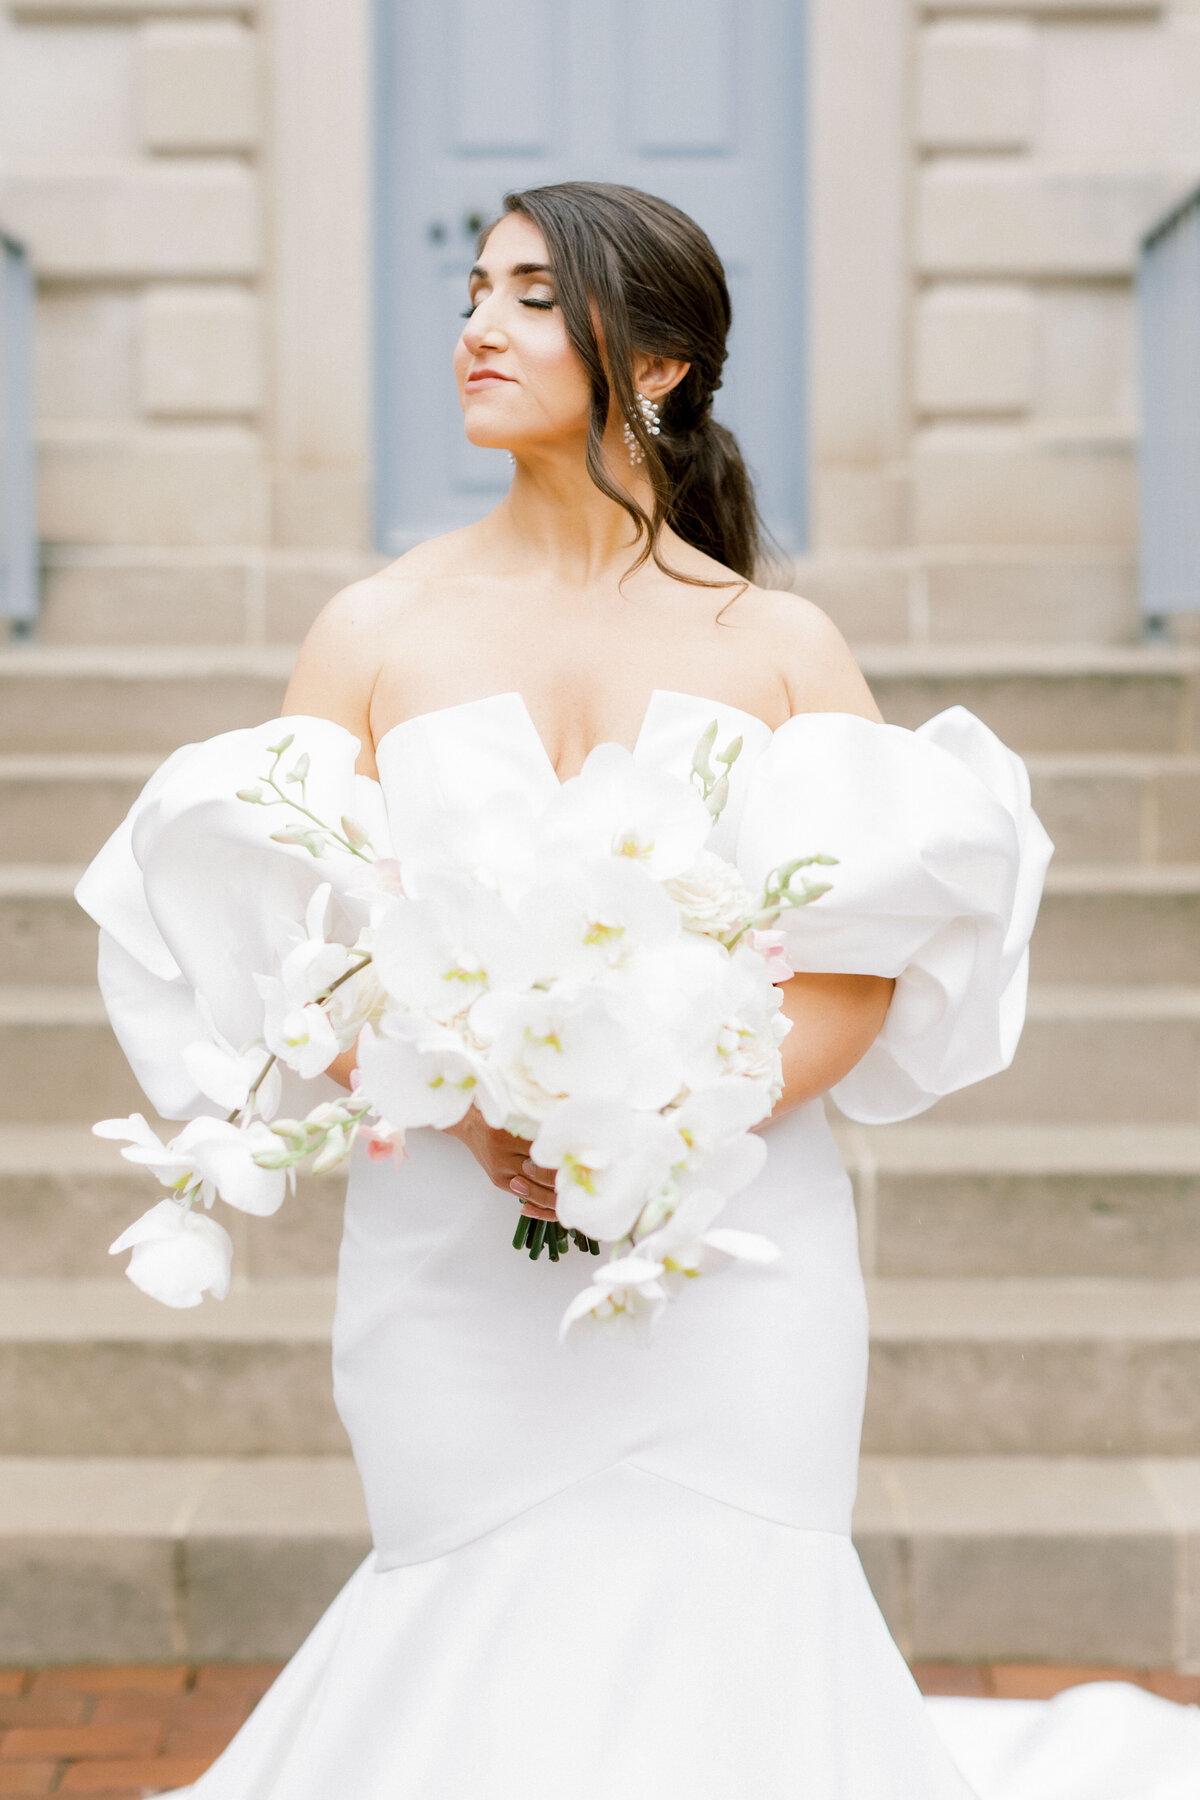 Fine art wedding photography of modern bride holding bouquet of white flowers